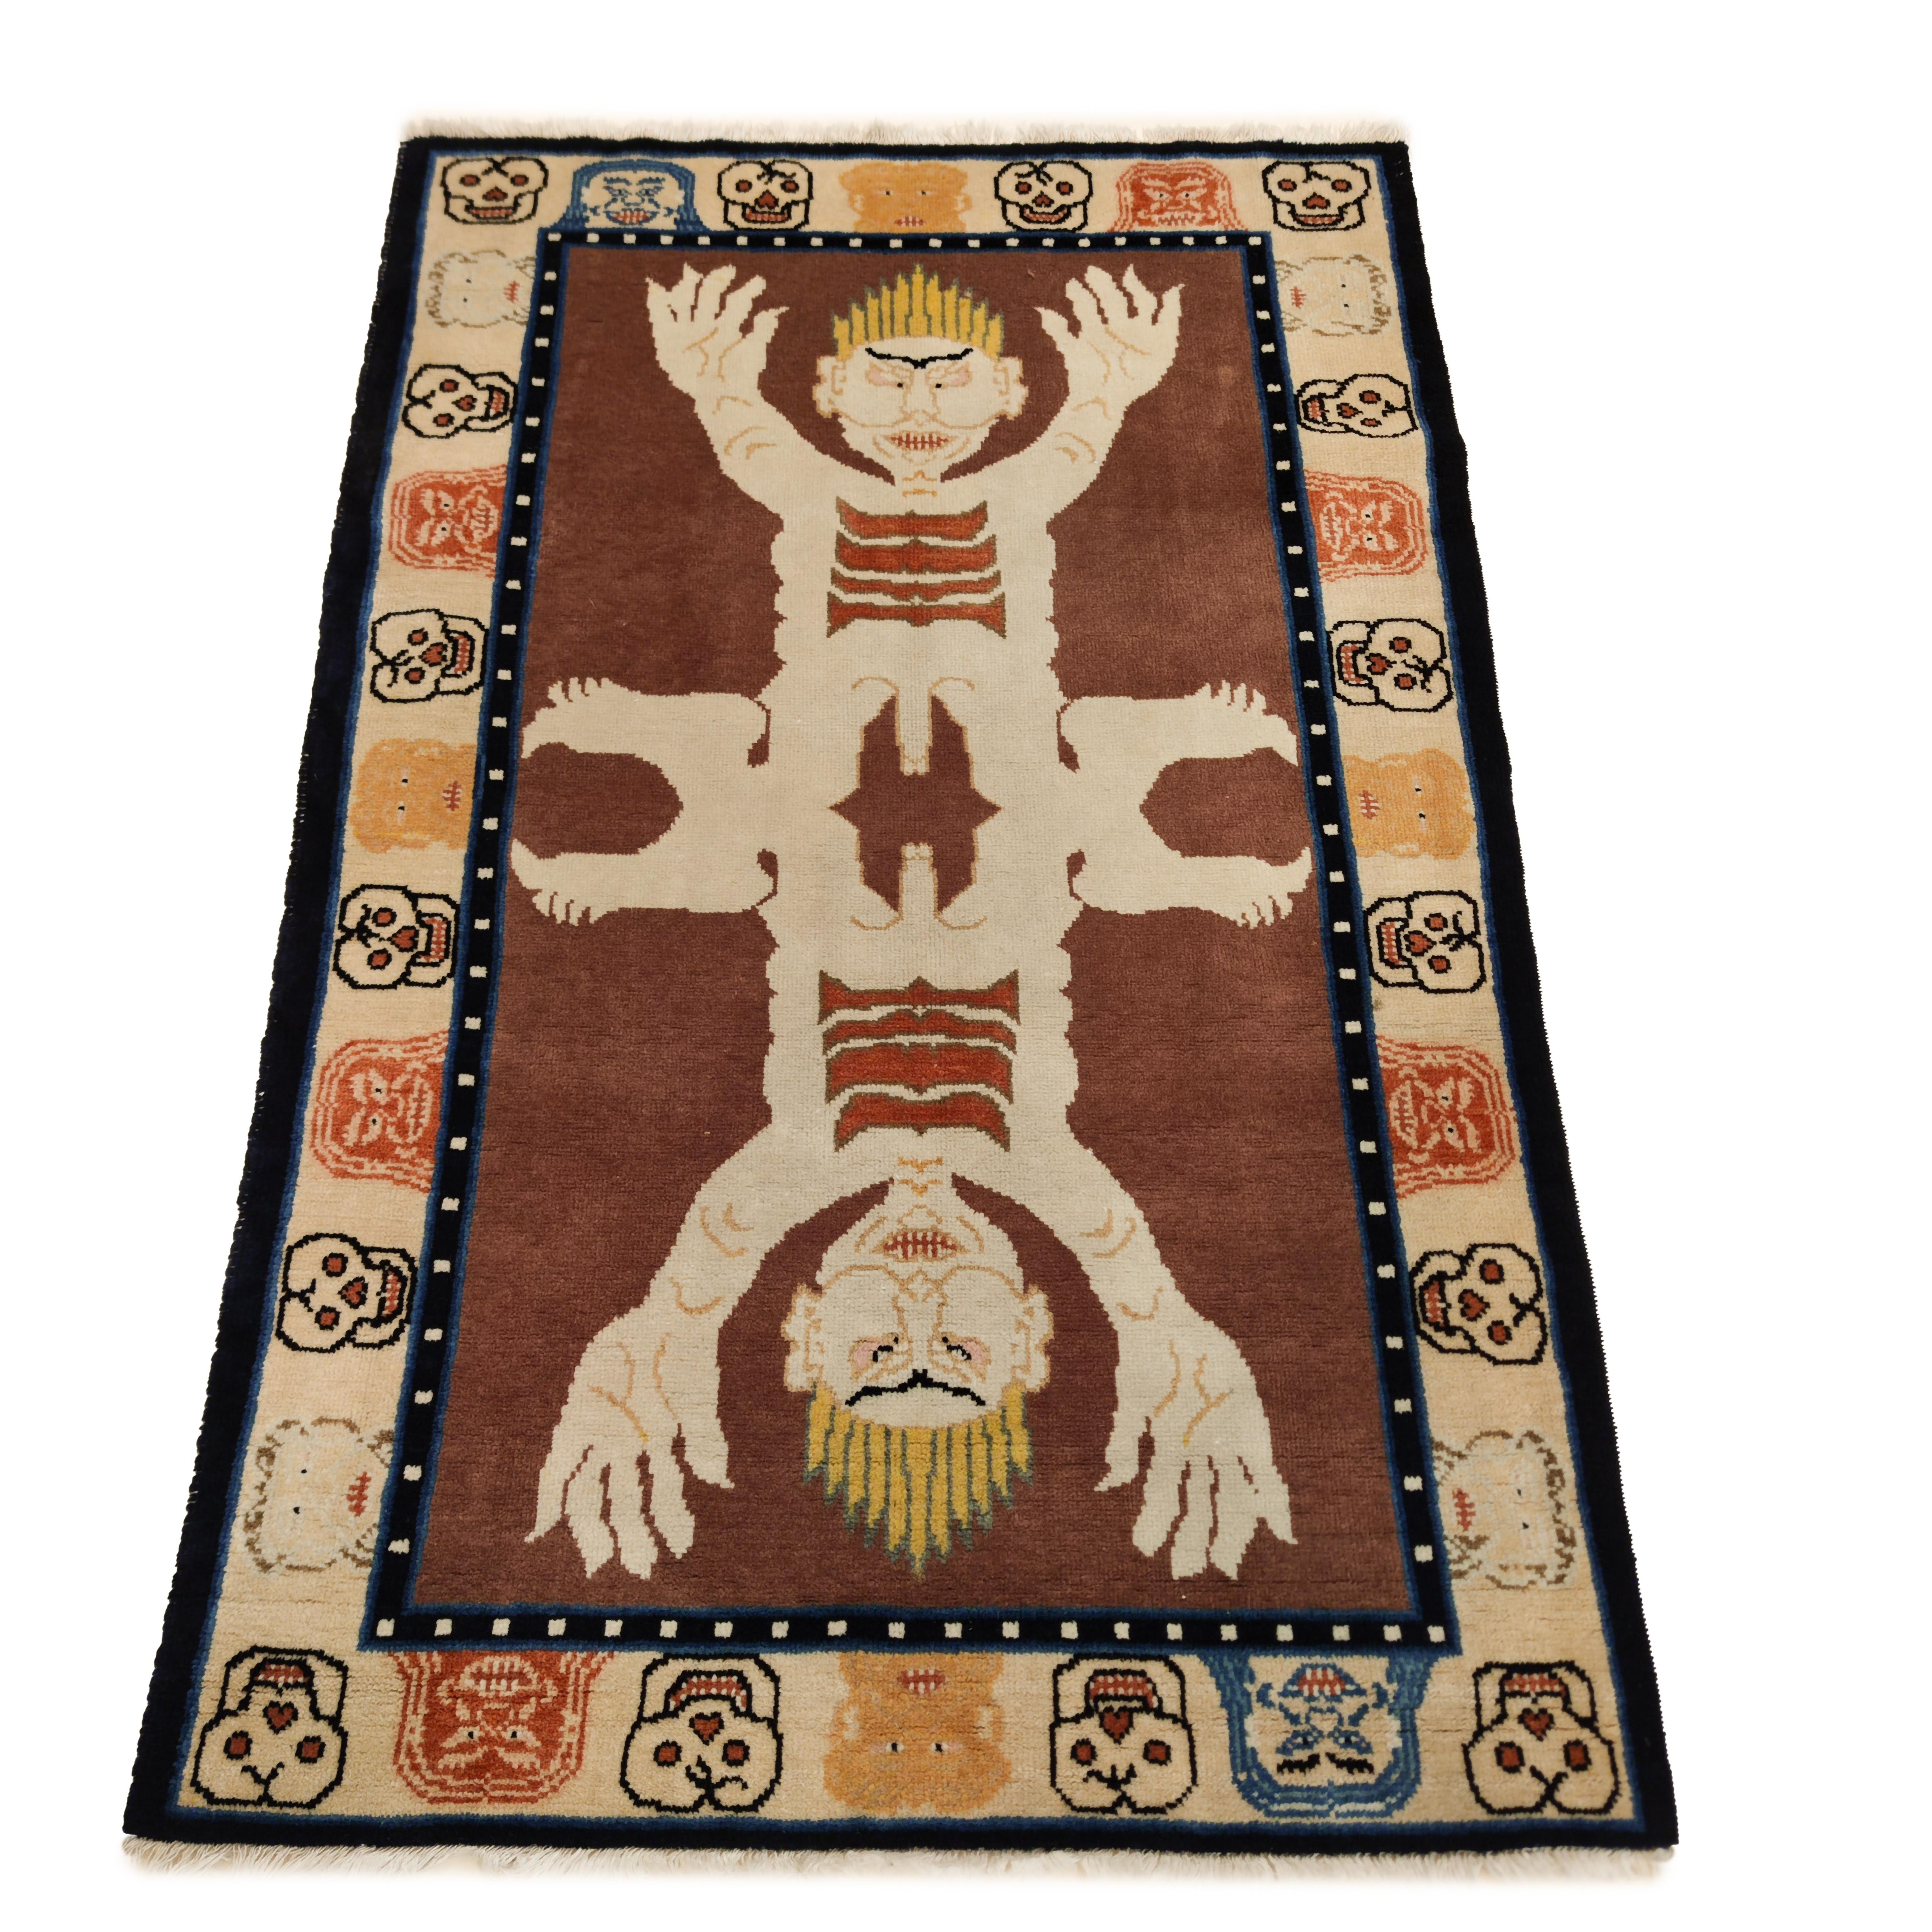 Tantric rugs were employed by Vajrayana Buddhists as seats of power during the practice of esoteric rites associated with protective deities. 

The peculiar imagery depicted in these rugs symbolise the power of detachment from one's body,